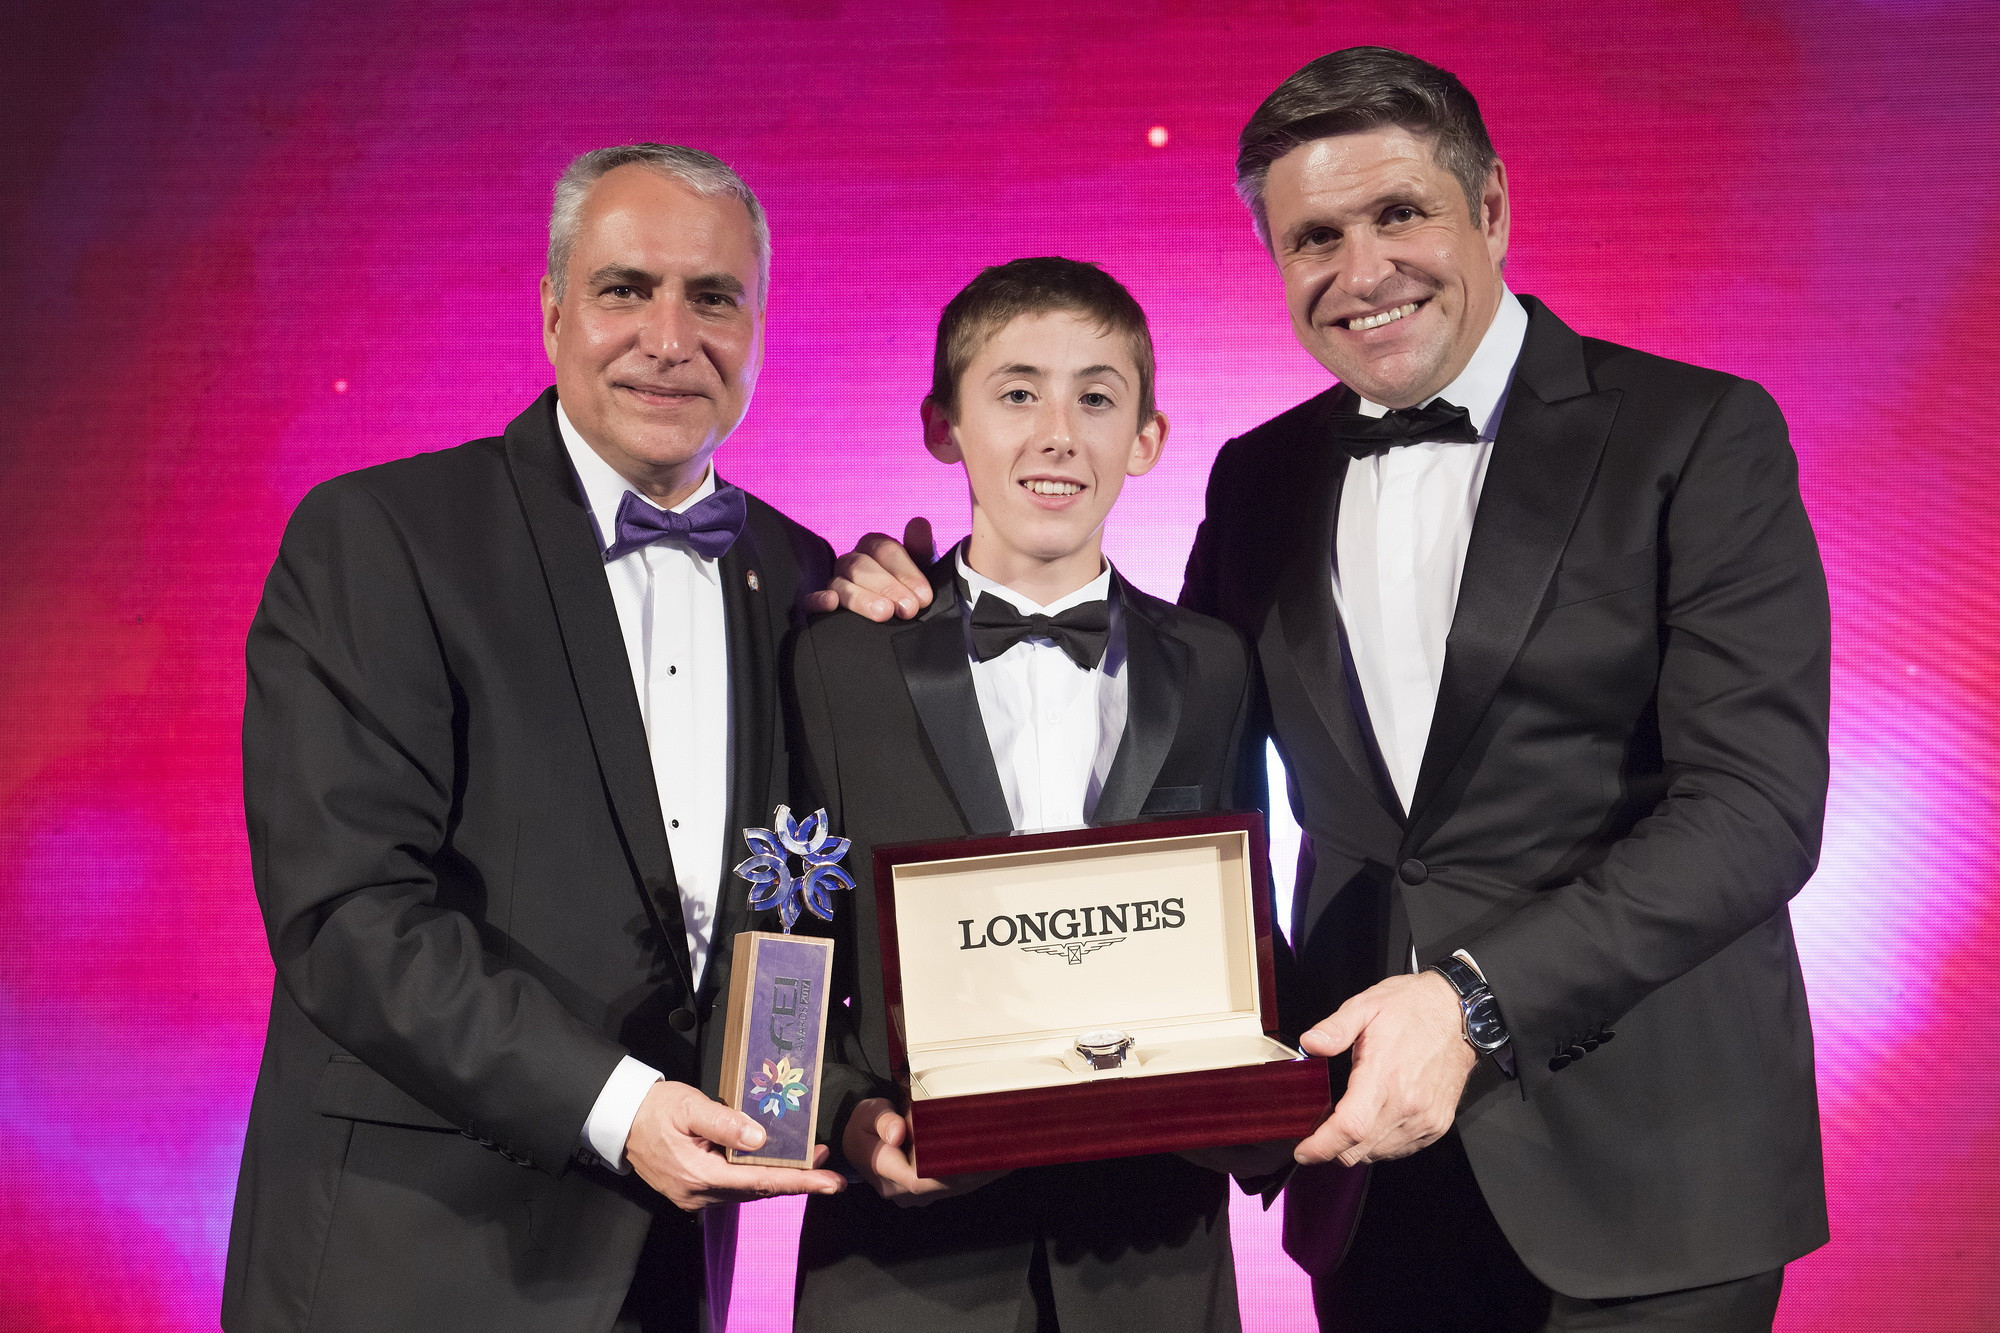 Ireland's Harry Allen, winner of the Longines Rising Star Award, pictured with FEI President Ingmar de Vos, left, and vice- president and head of international marketing Juan-Carlos Capelli at the FEI Awards in Montevideo ©FEI